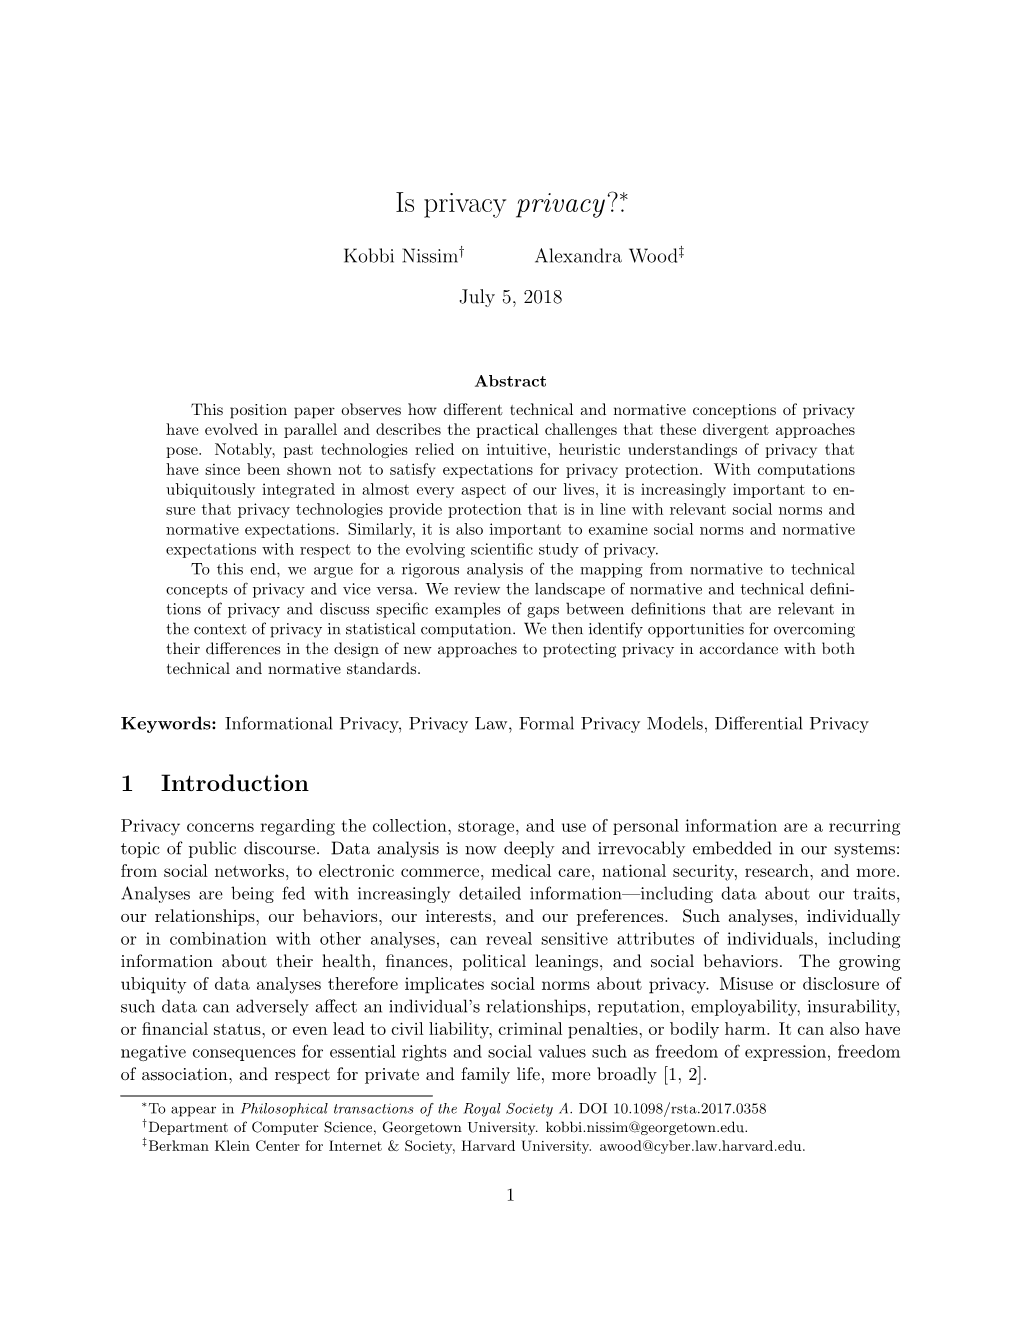 Is Privacy Privacy -2.Pdf